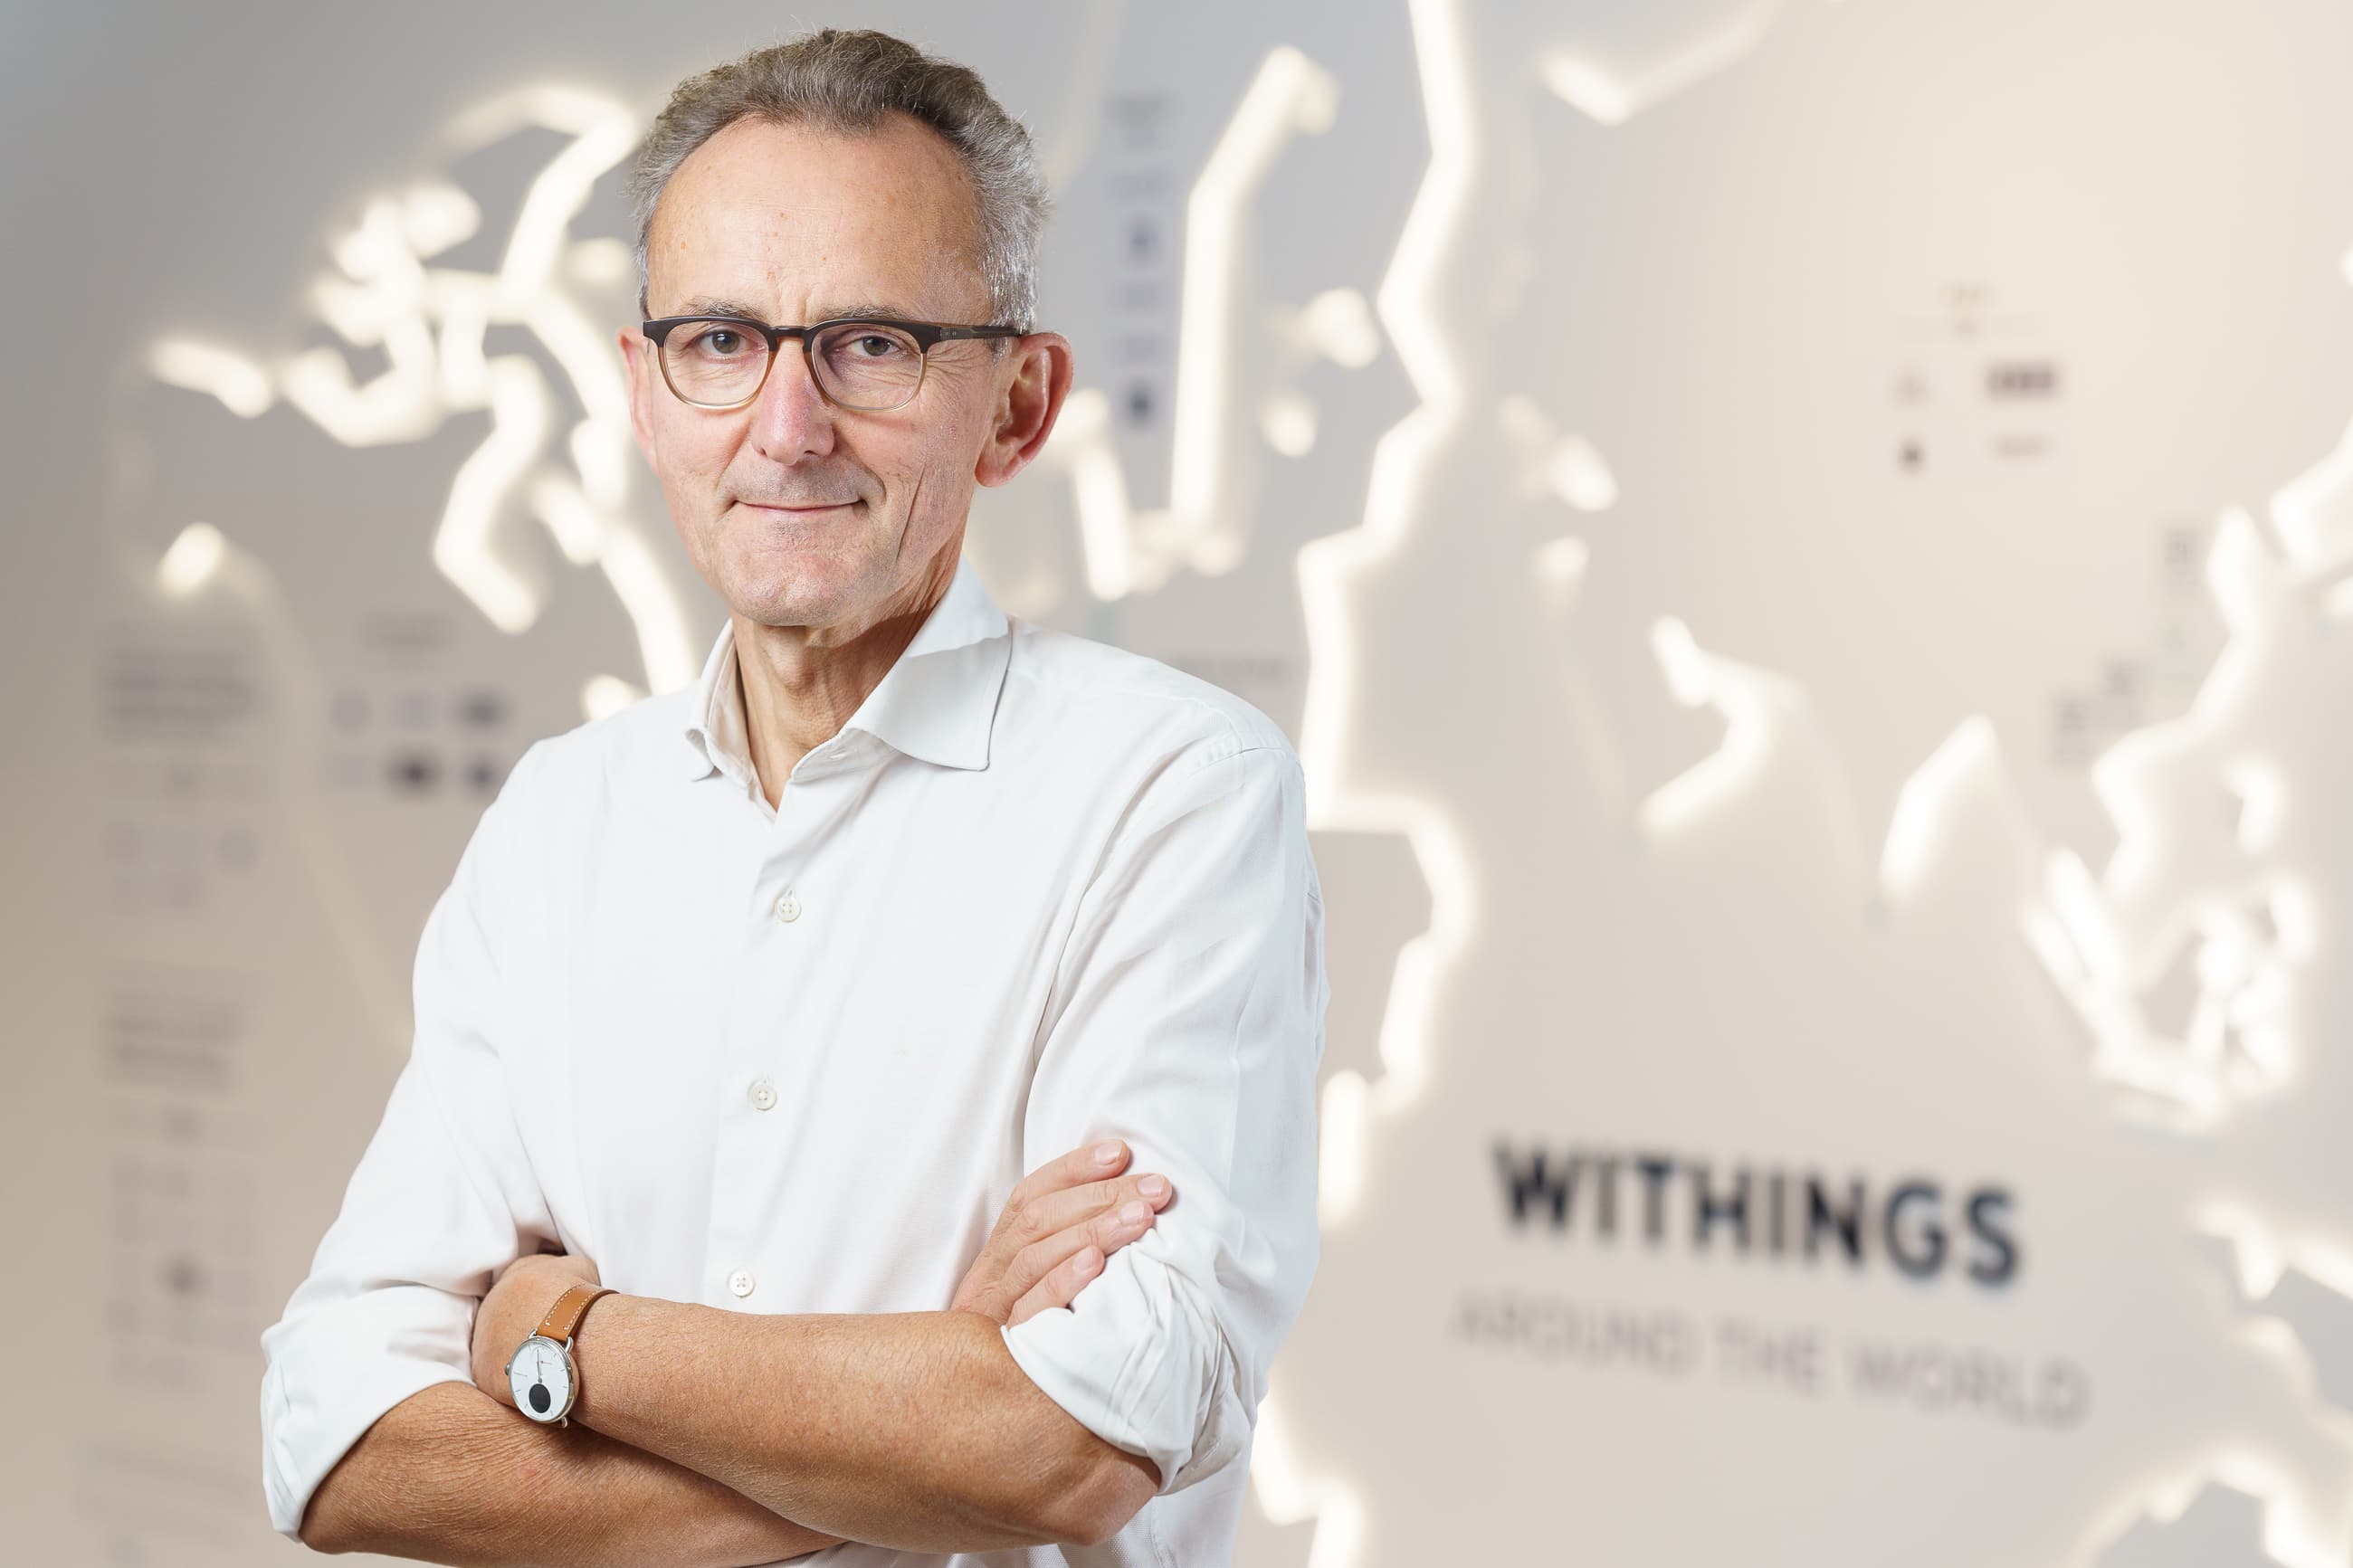 Medable Announces Partnership with Withings Health Solutions to